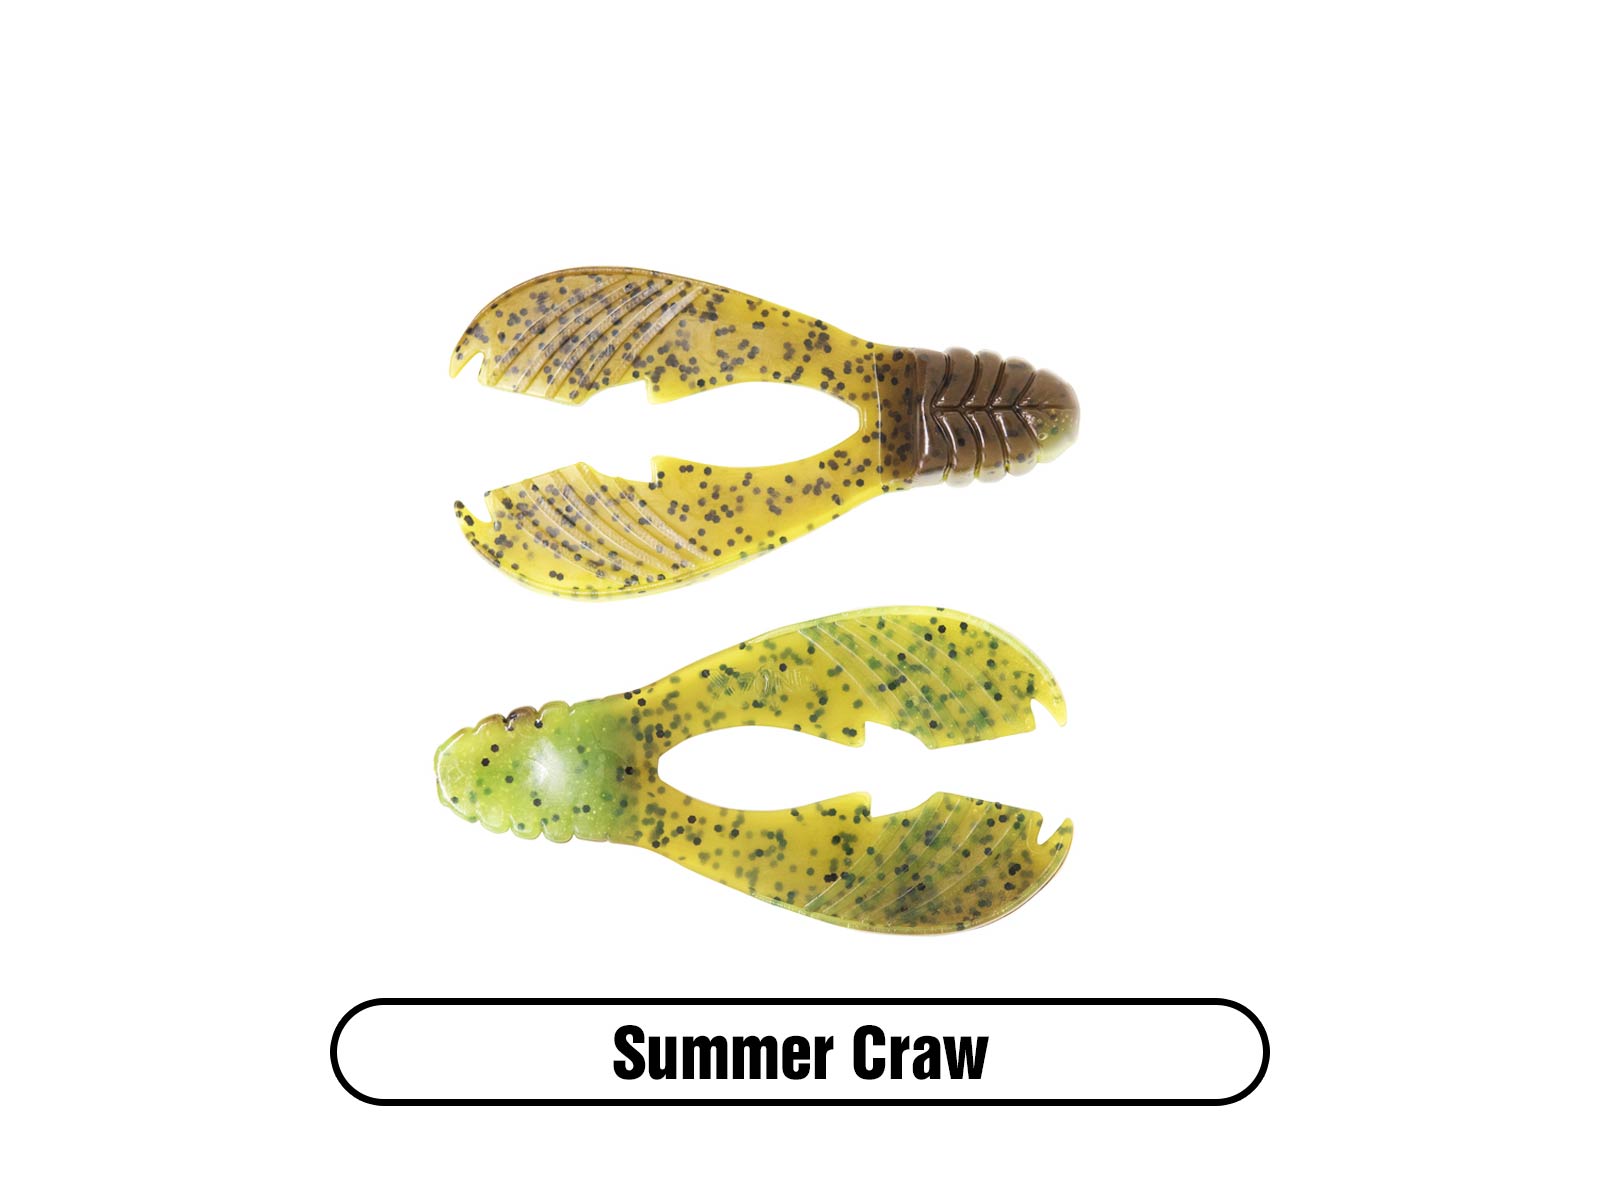 Soft Plastic Craw Jig Trailer Bait for Largemouth Bass Fishing, Smallmouth Bass and Walleye Fishing Lure